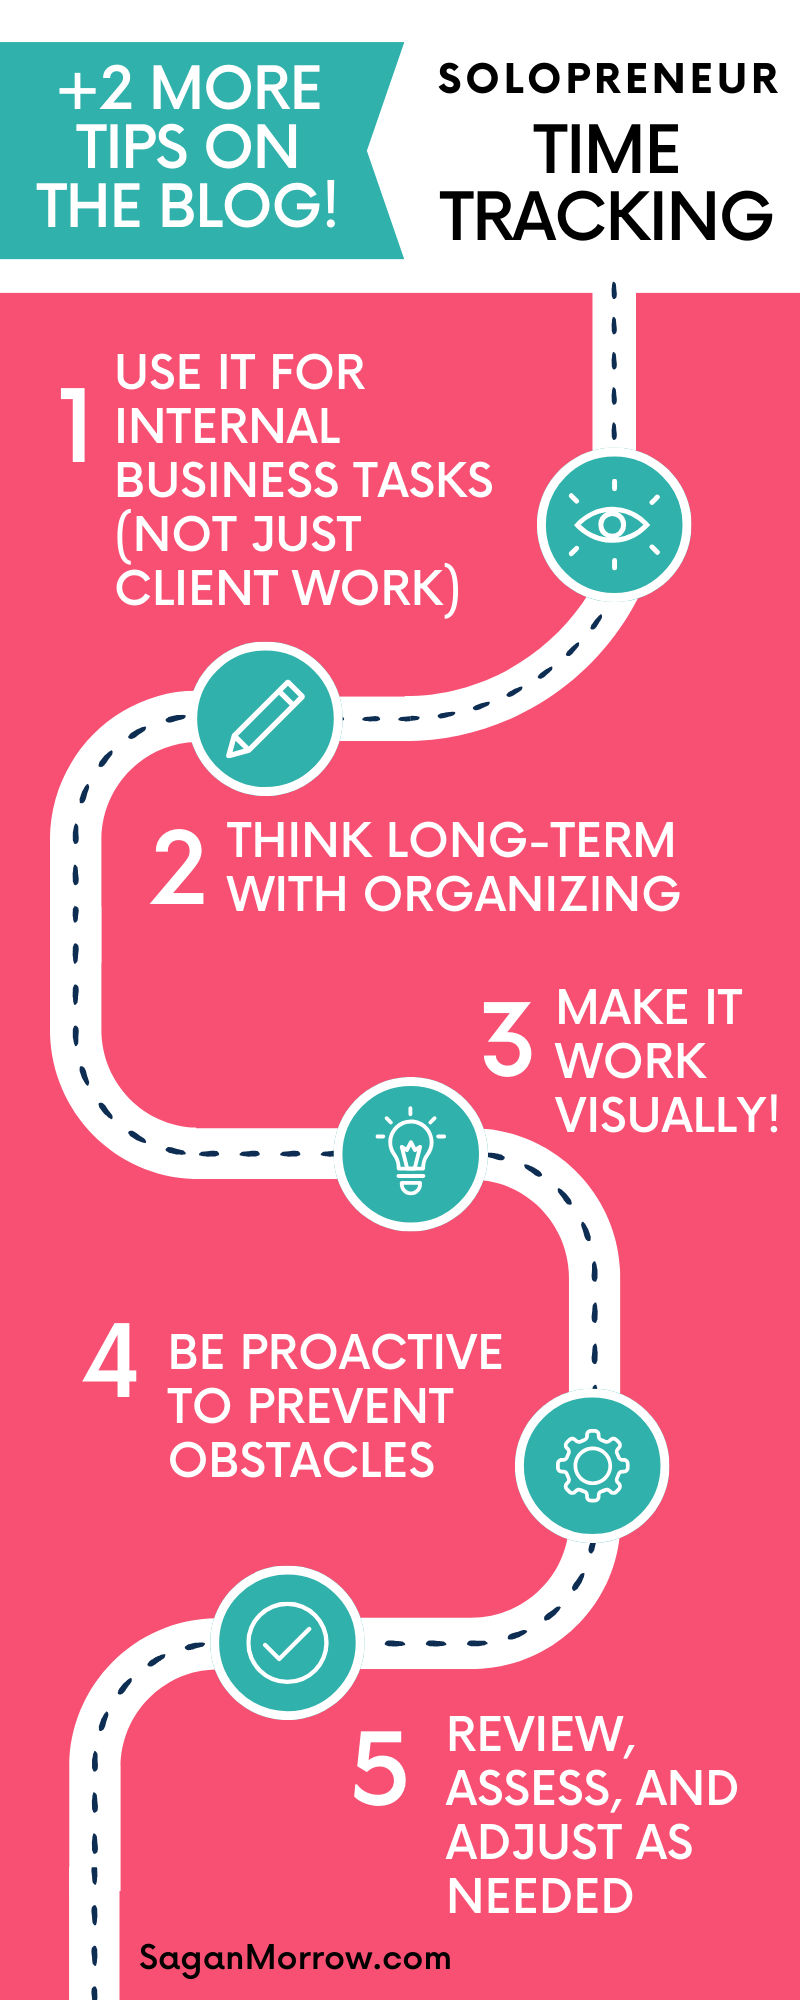 solopreneur time tracking infographic - how to do time tracking